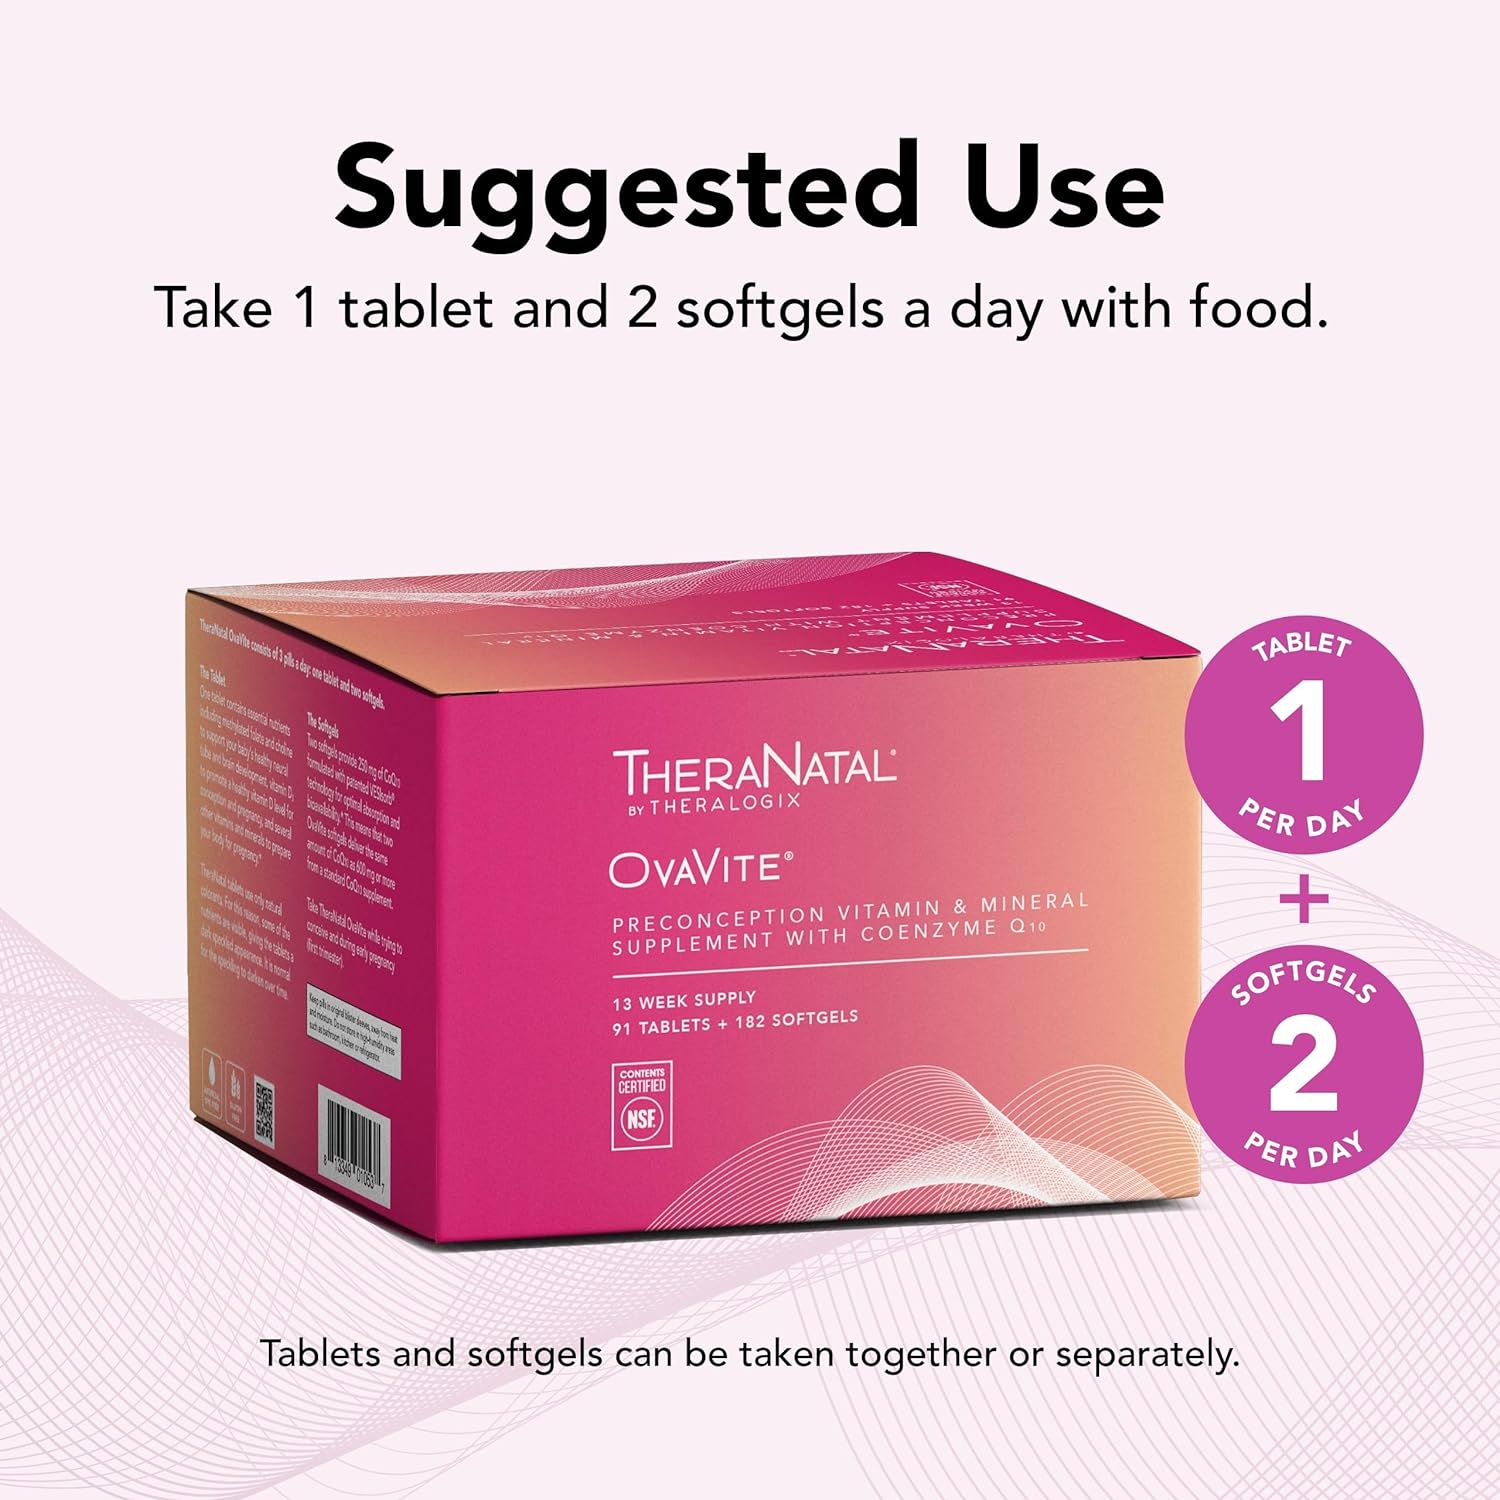 Theralogix TheraNatal OvaVite Preconception Vitamins - 13-Week Supply - Prenatal Vitamins & Fertility Supplement for Women with CoQ10* - NSF Certified - 91 Tabs, 182 Softgels (91 Servings) : Health & Household